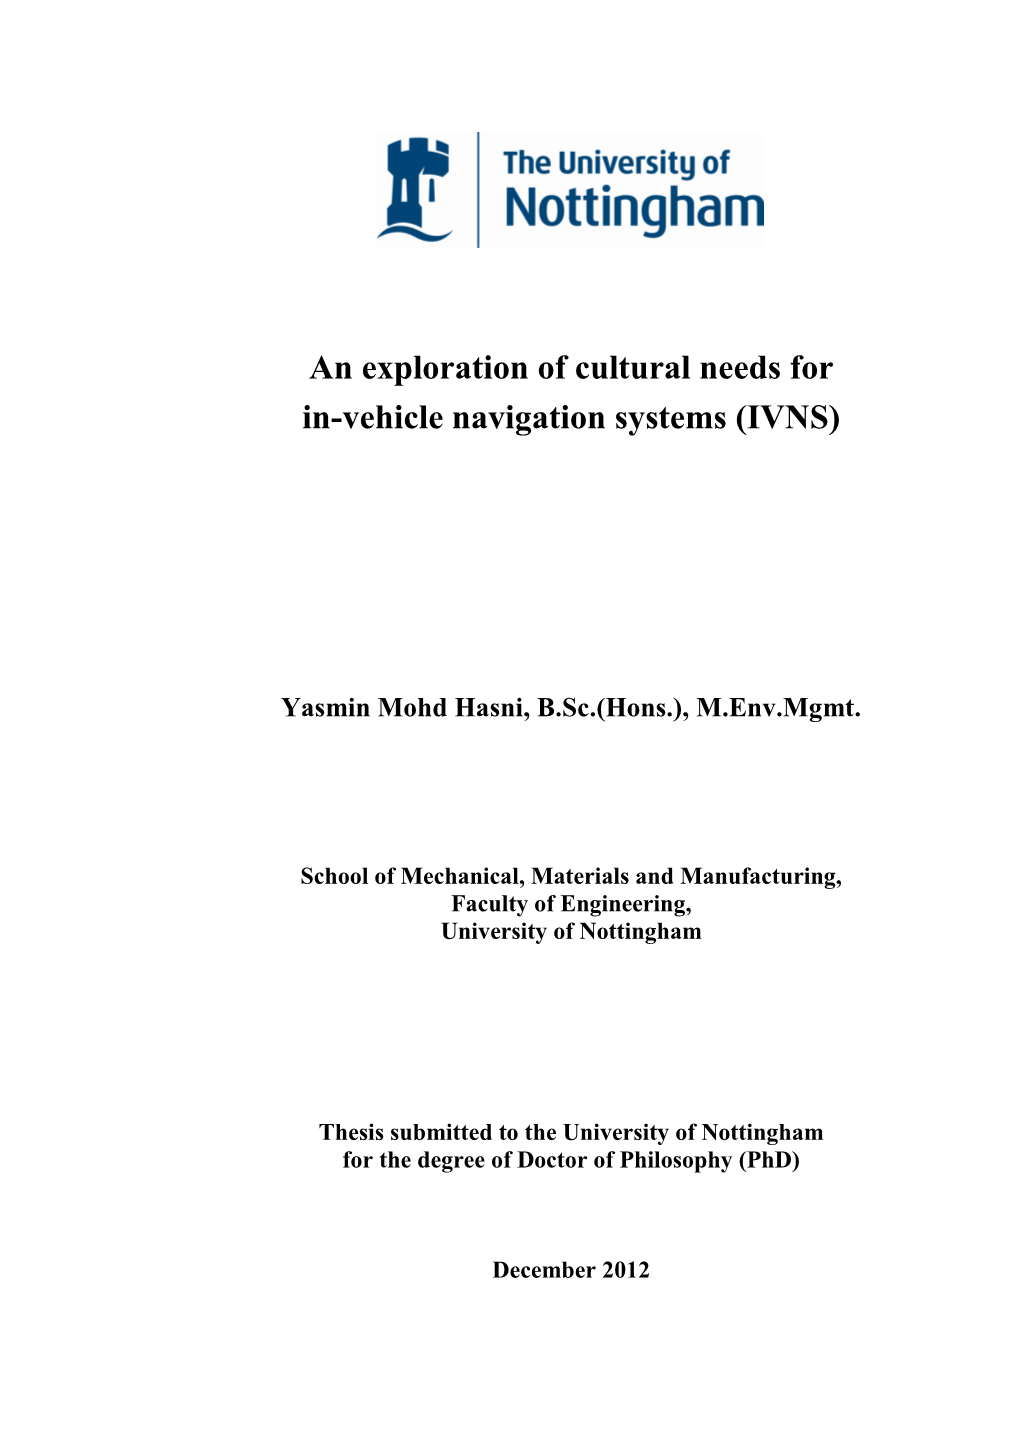 An Exploration of Cultural Needs for In-Vehicle Navigation Systems (IVNS)